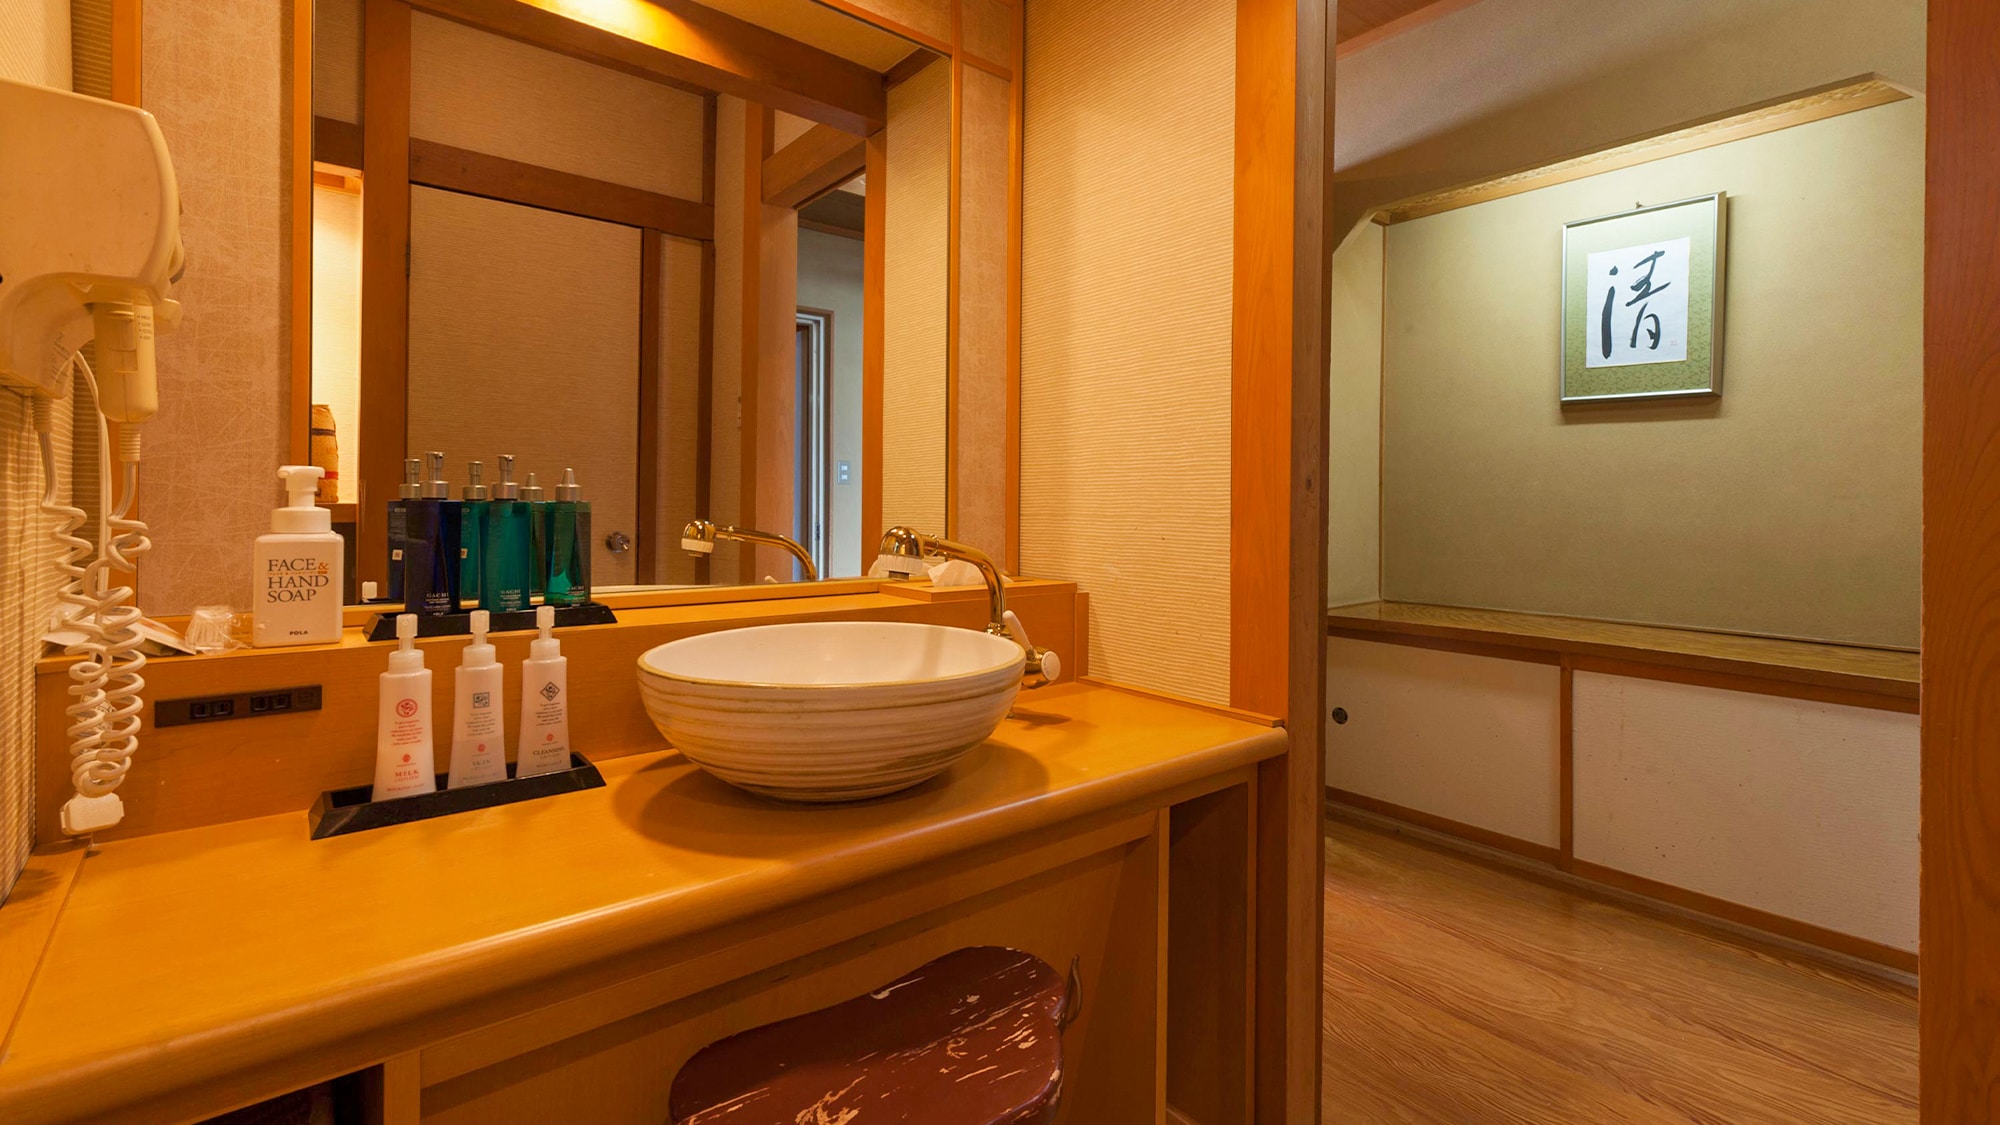 ■Deluxe Japanese-style room 10 tatami mats + 4.5 tatami mats｜In addition to women's cosmetics, men's cosmetics are also available